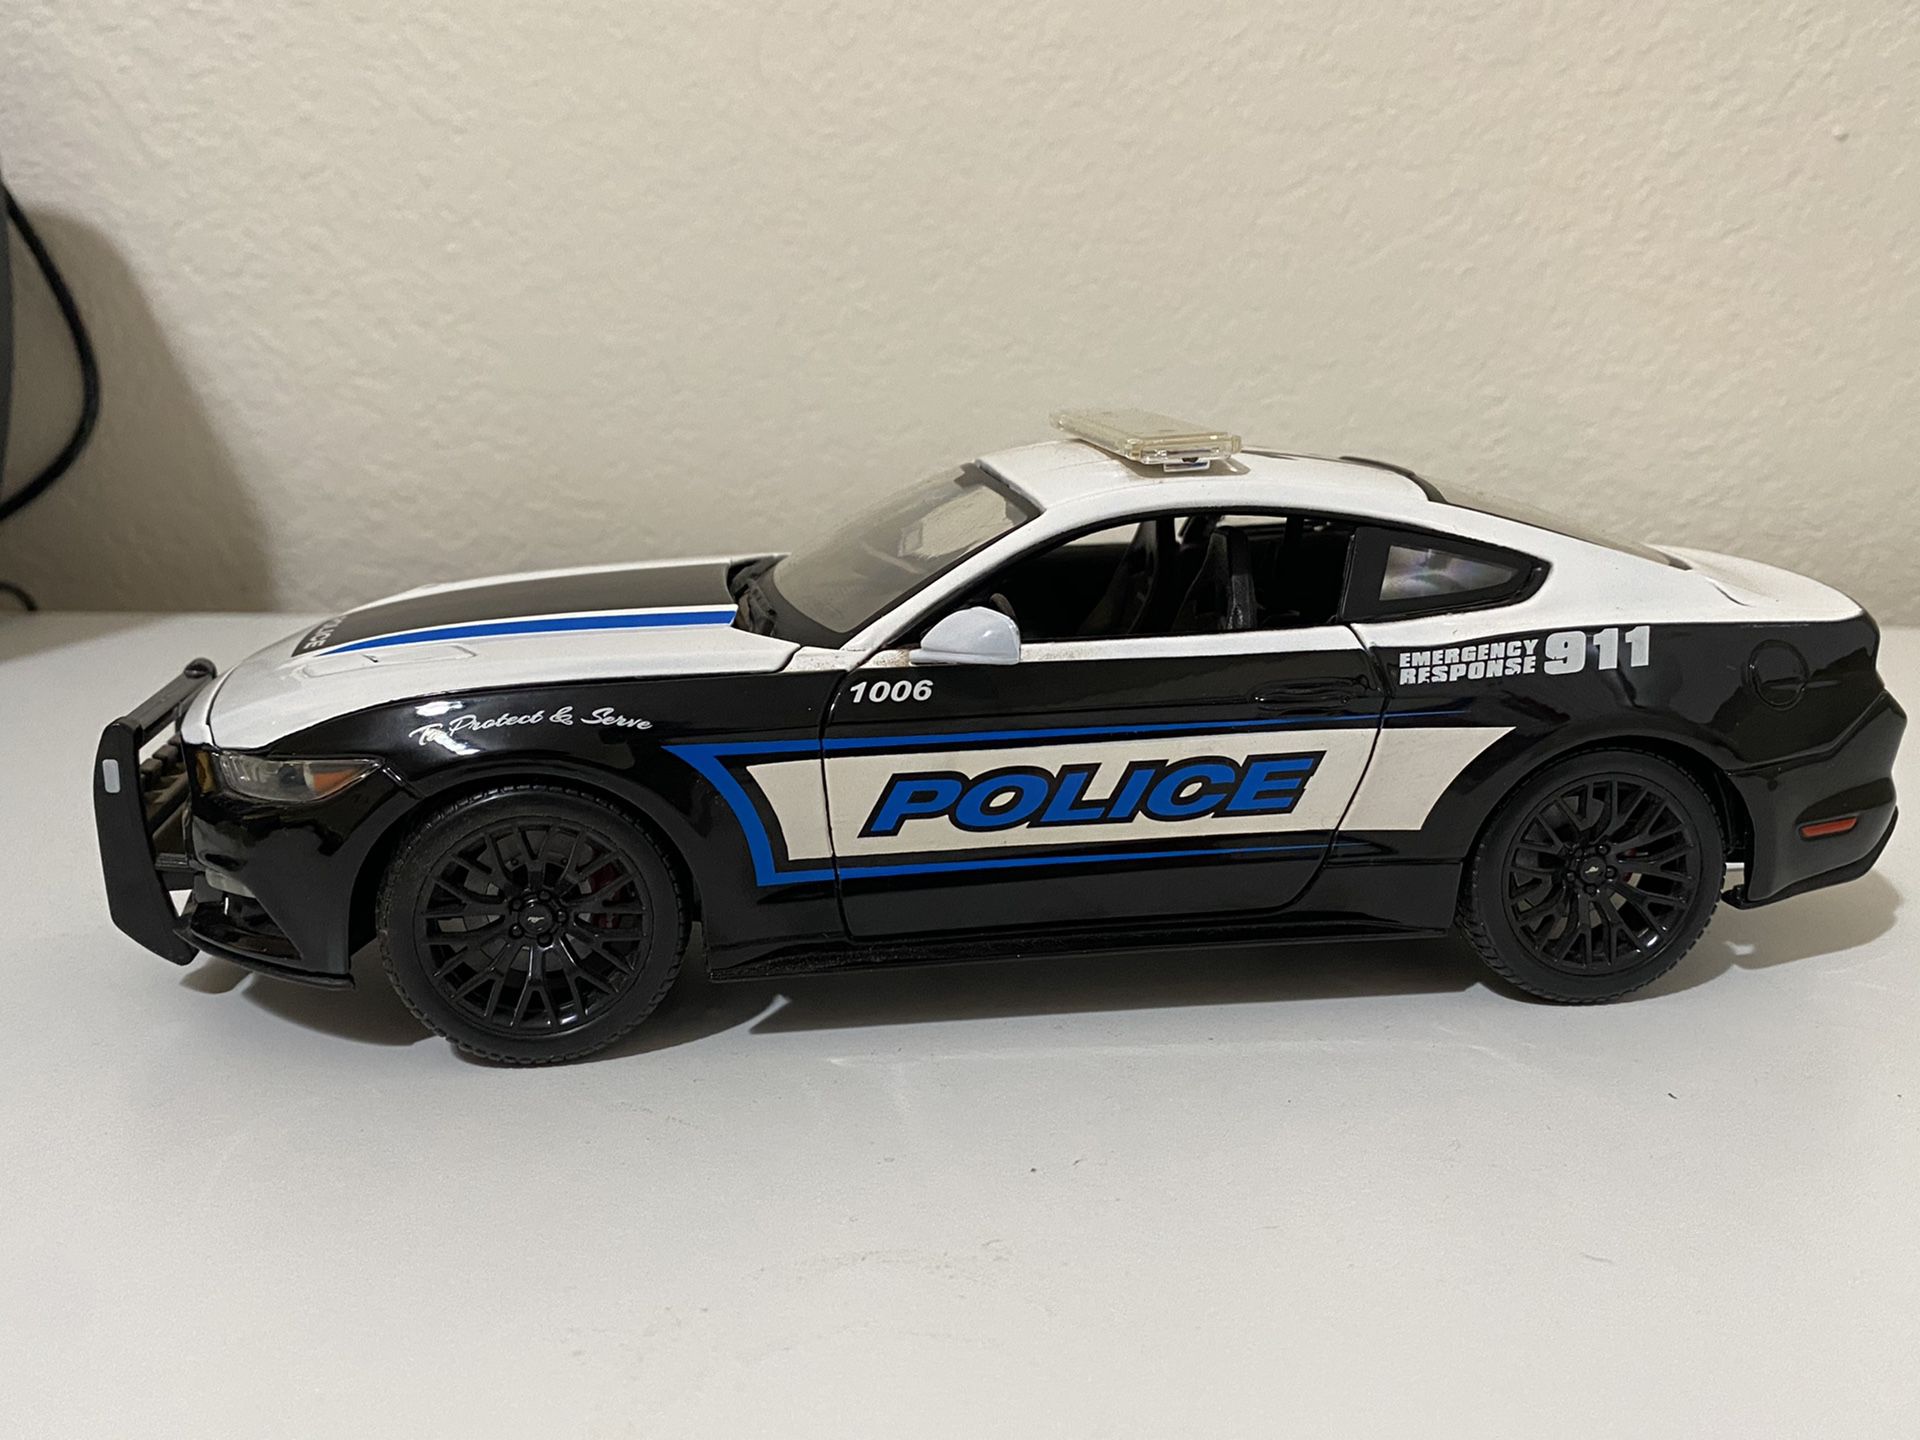 Diecast model 2015 Ford Mustang GT police 1:18